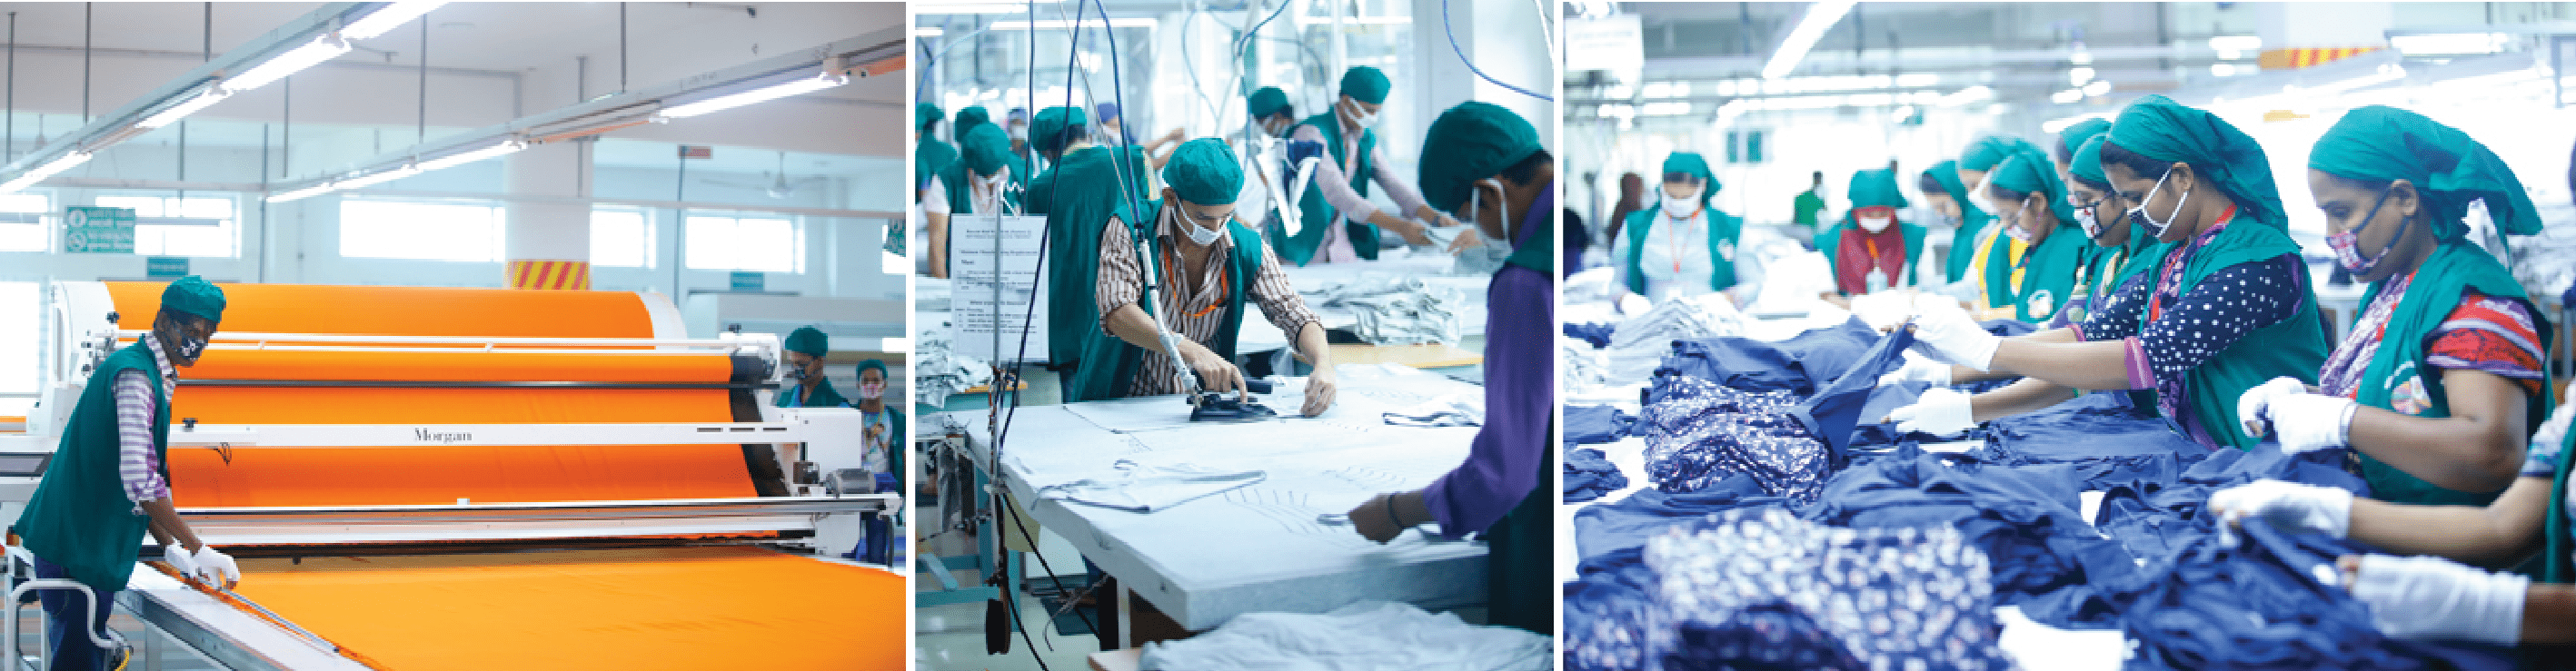 Manufacturing processes in a garment factory in Bangladesh